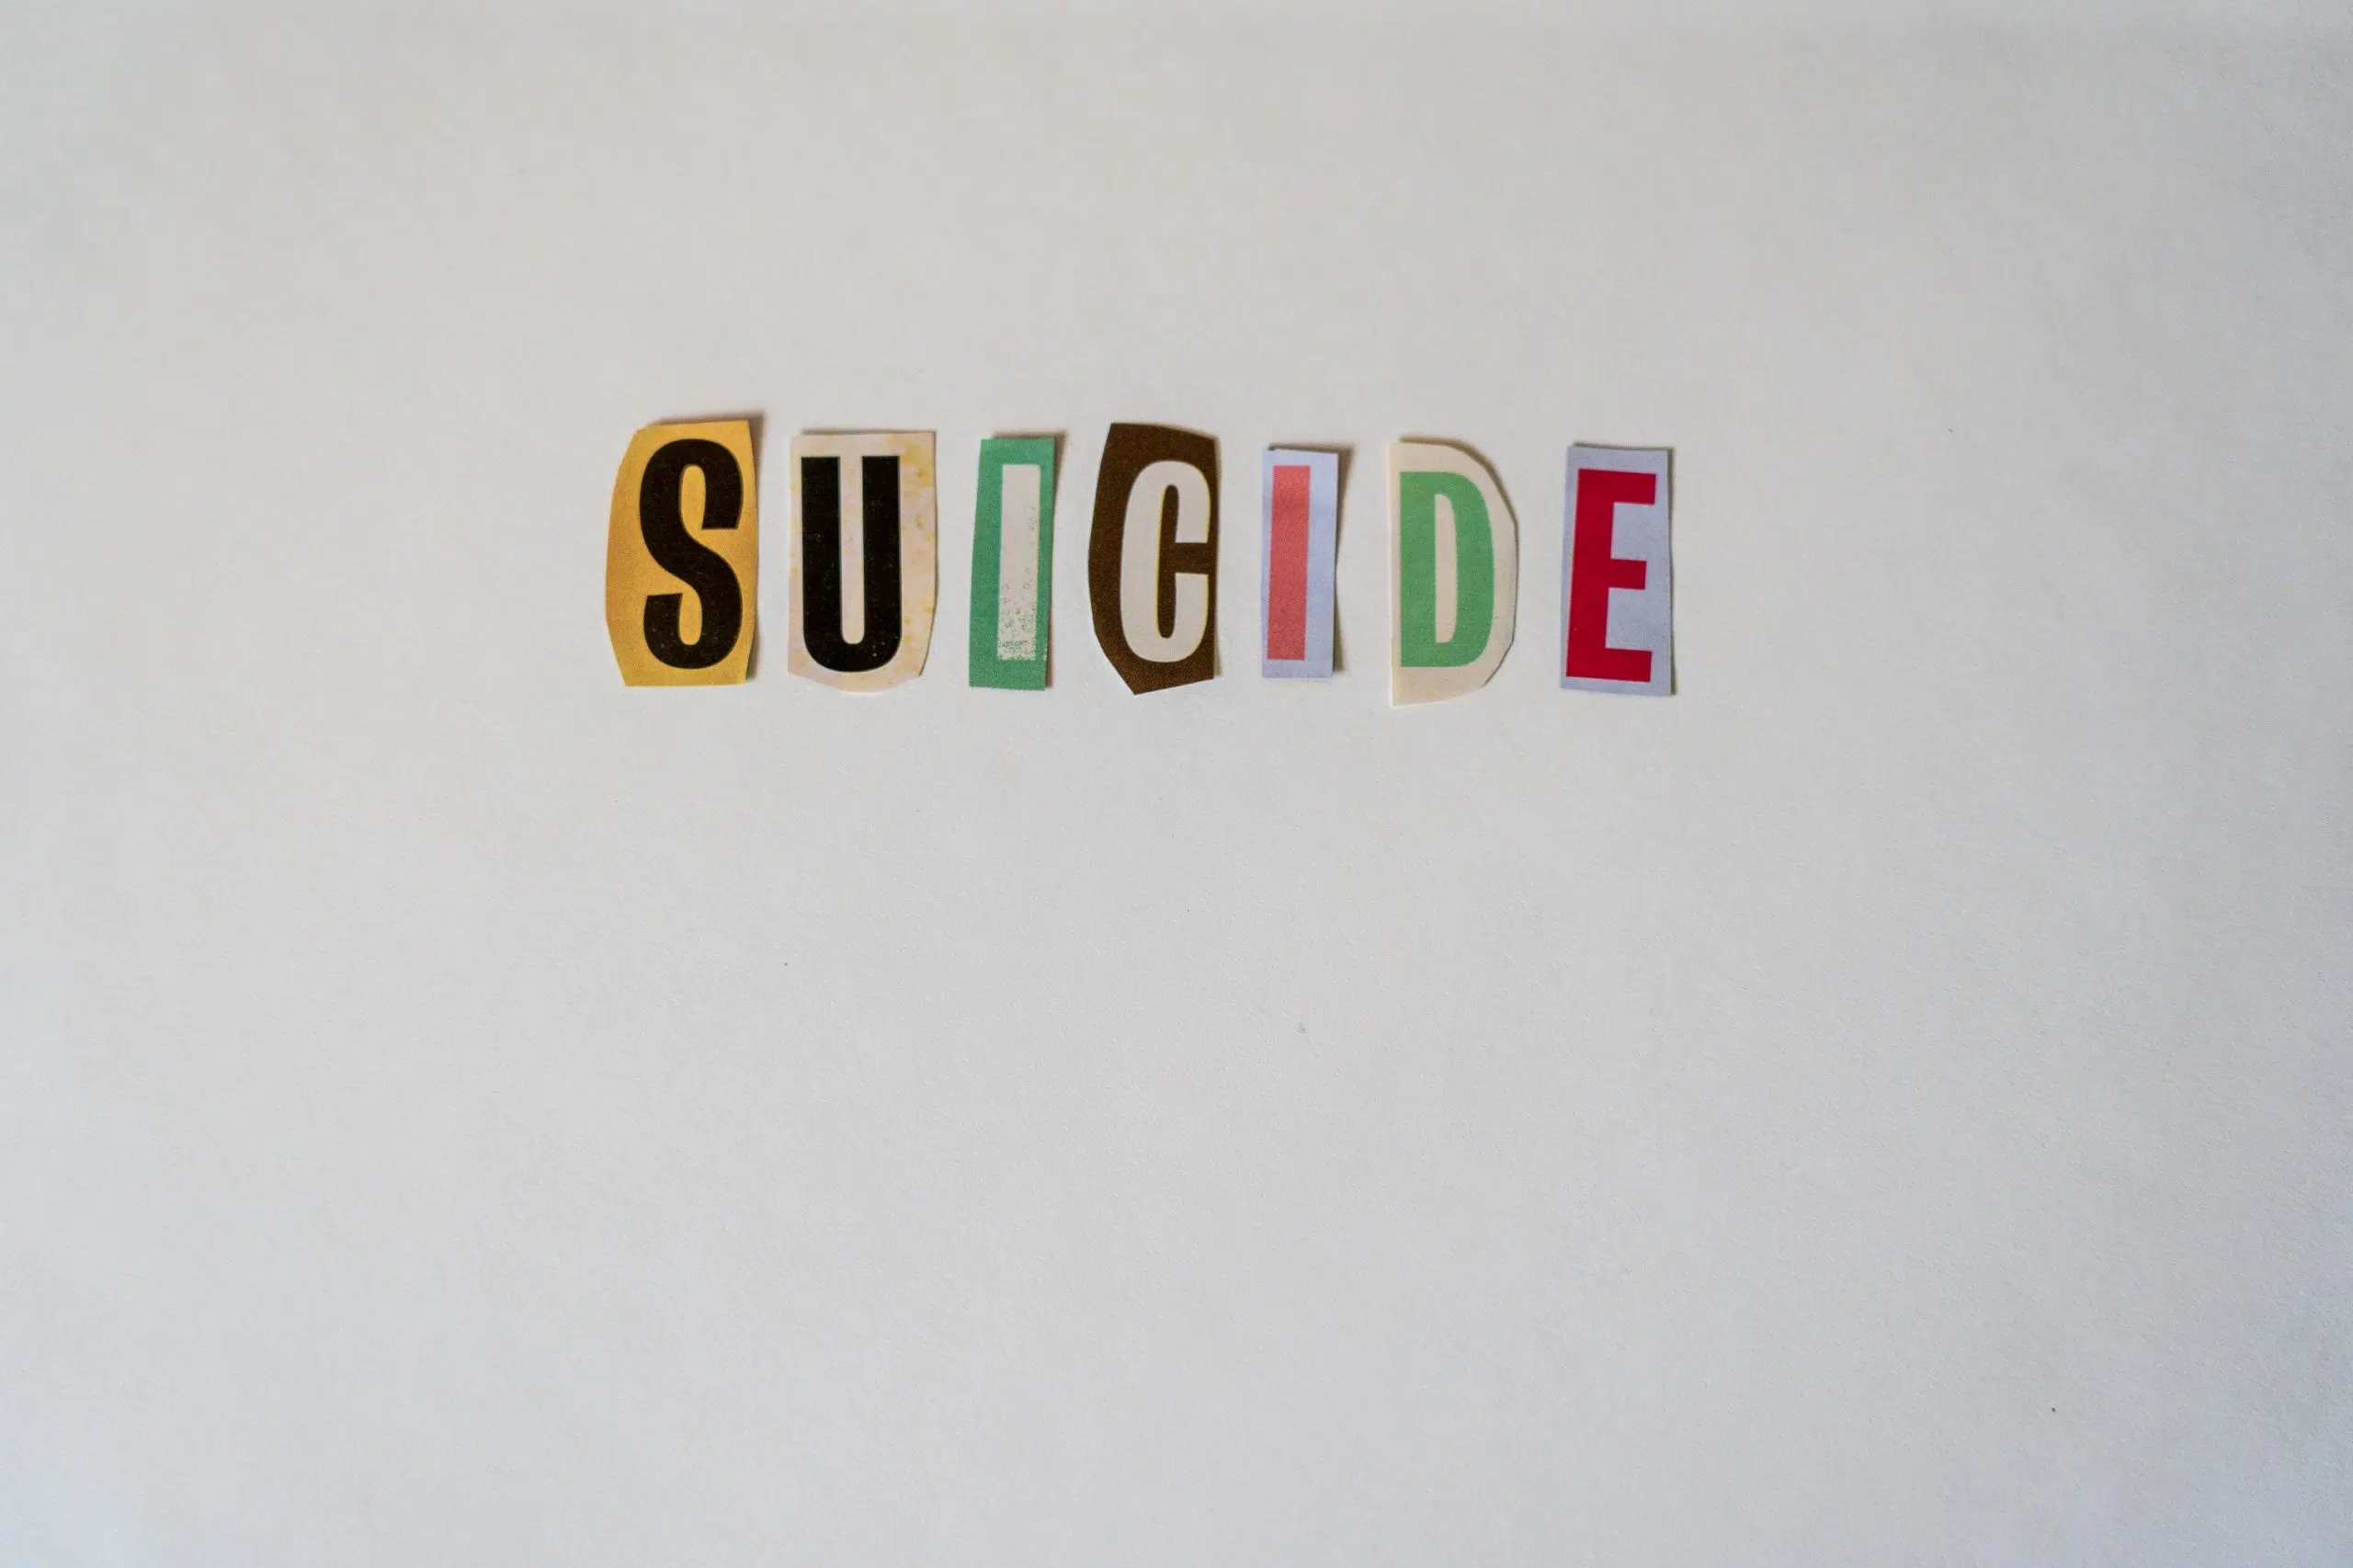 2021 suicide rates in the U.S. saw the largest one year increase